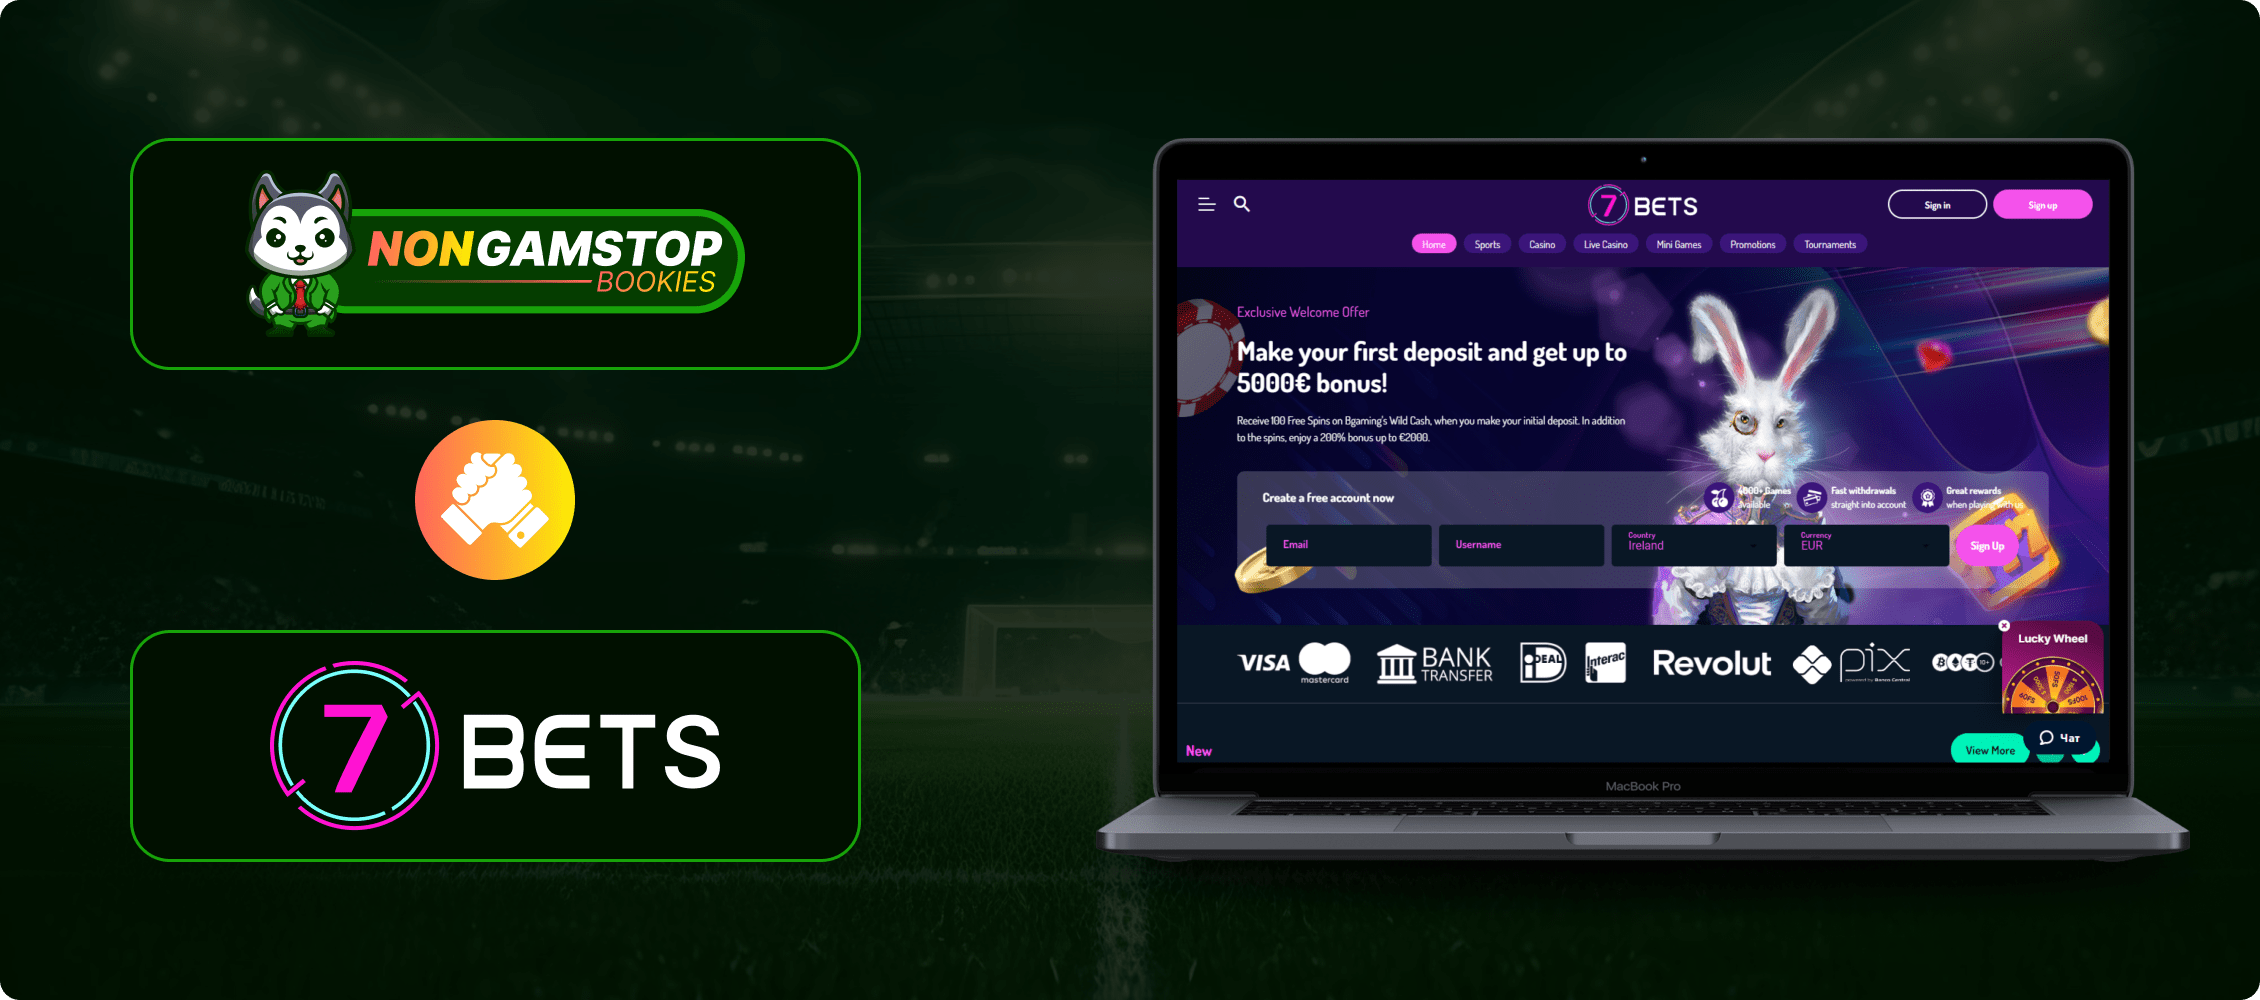 7Bets.io betting site banner